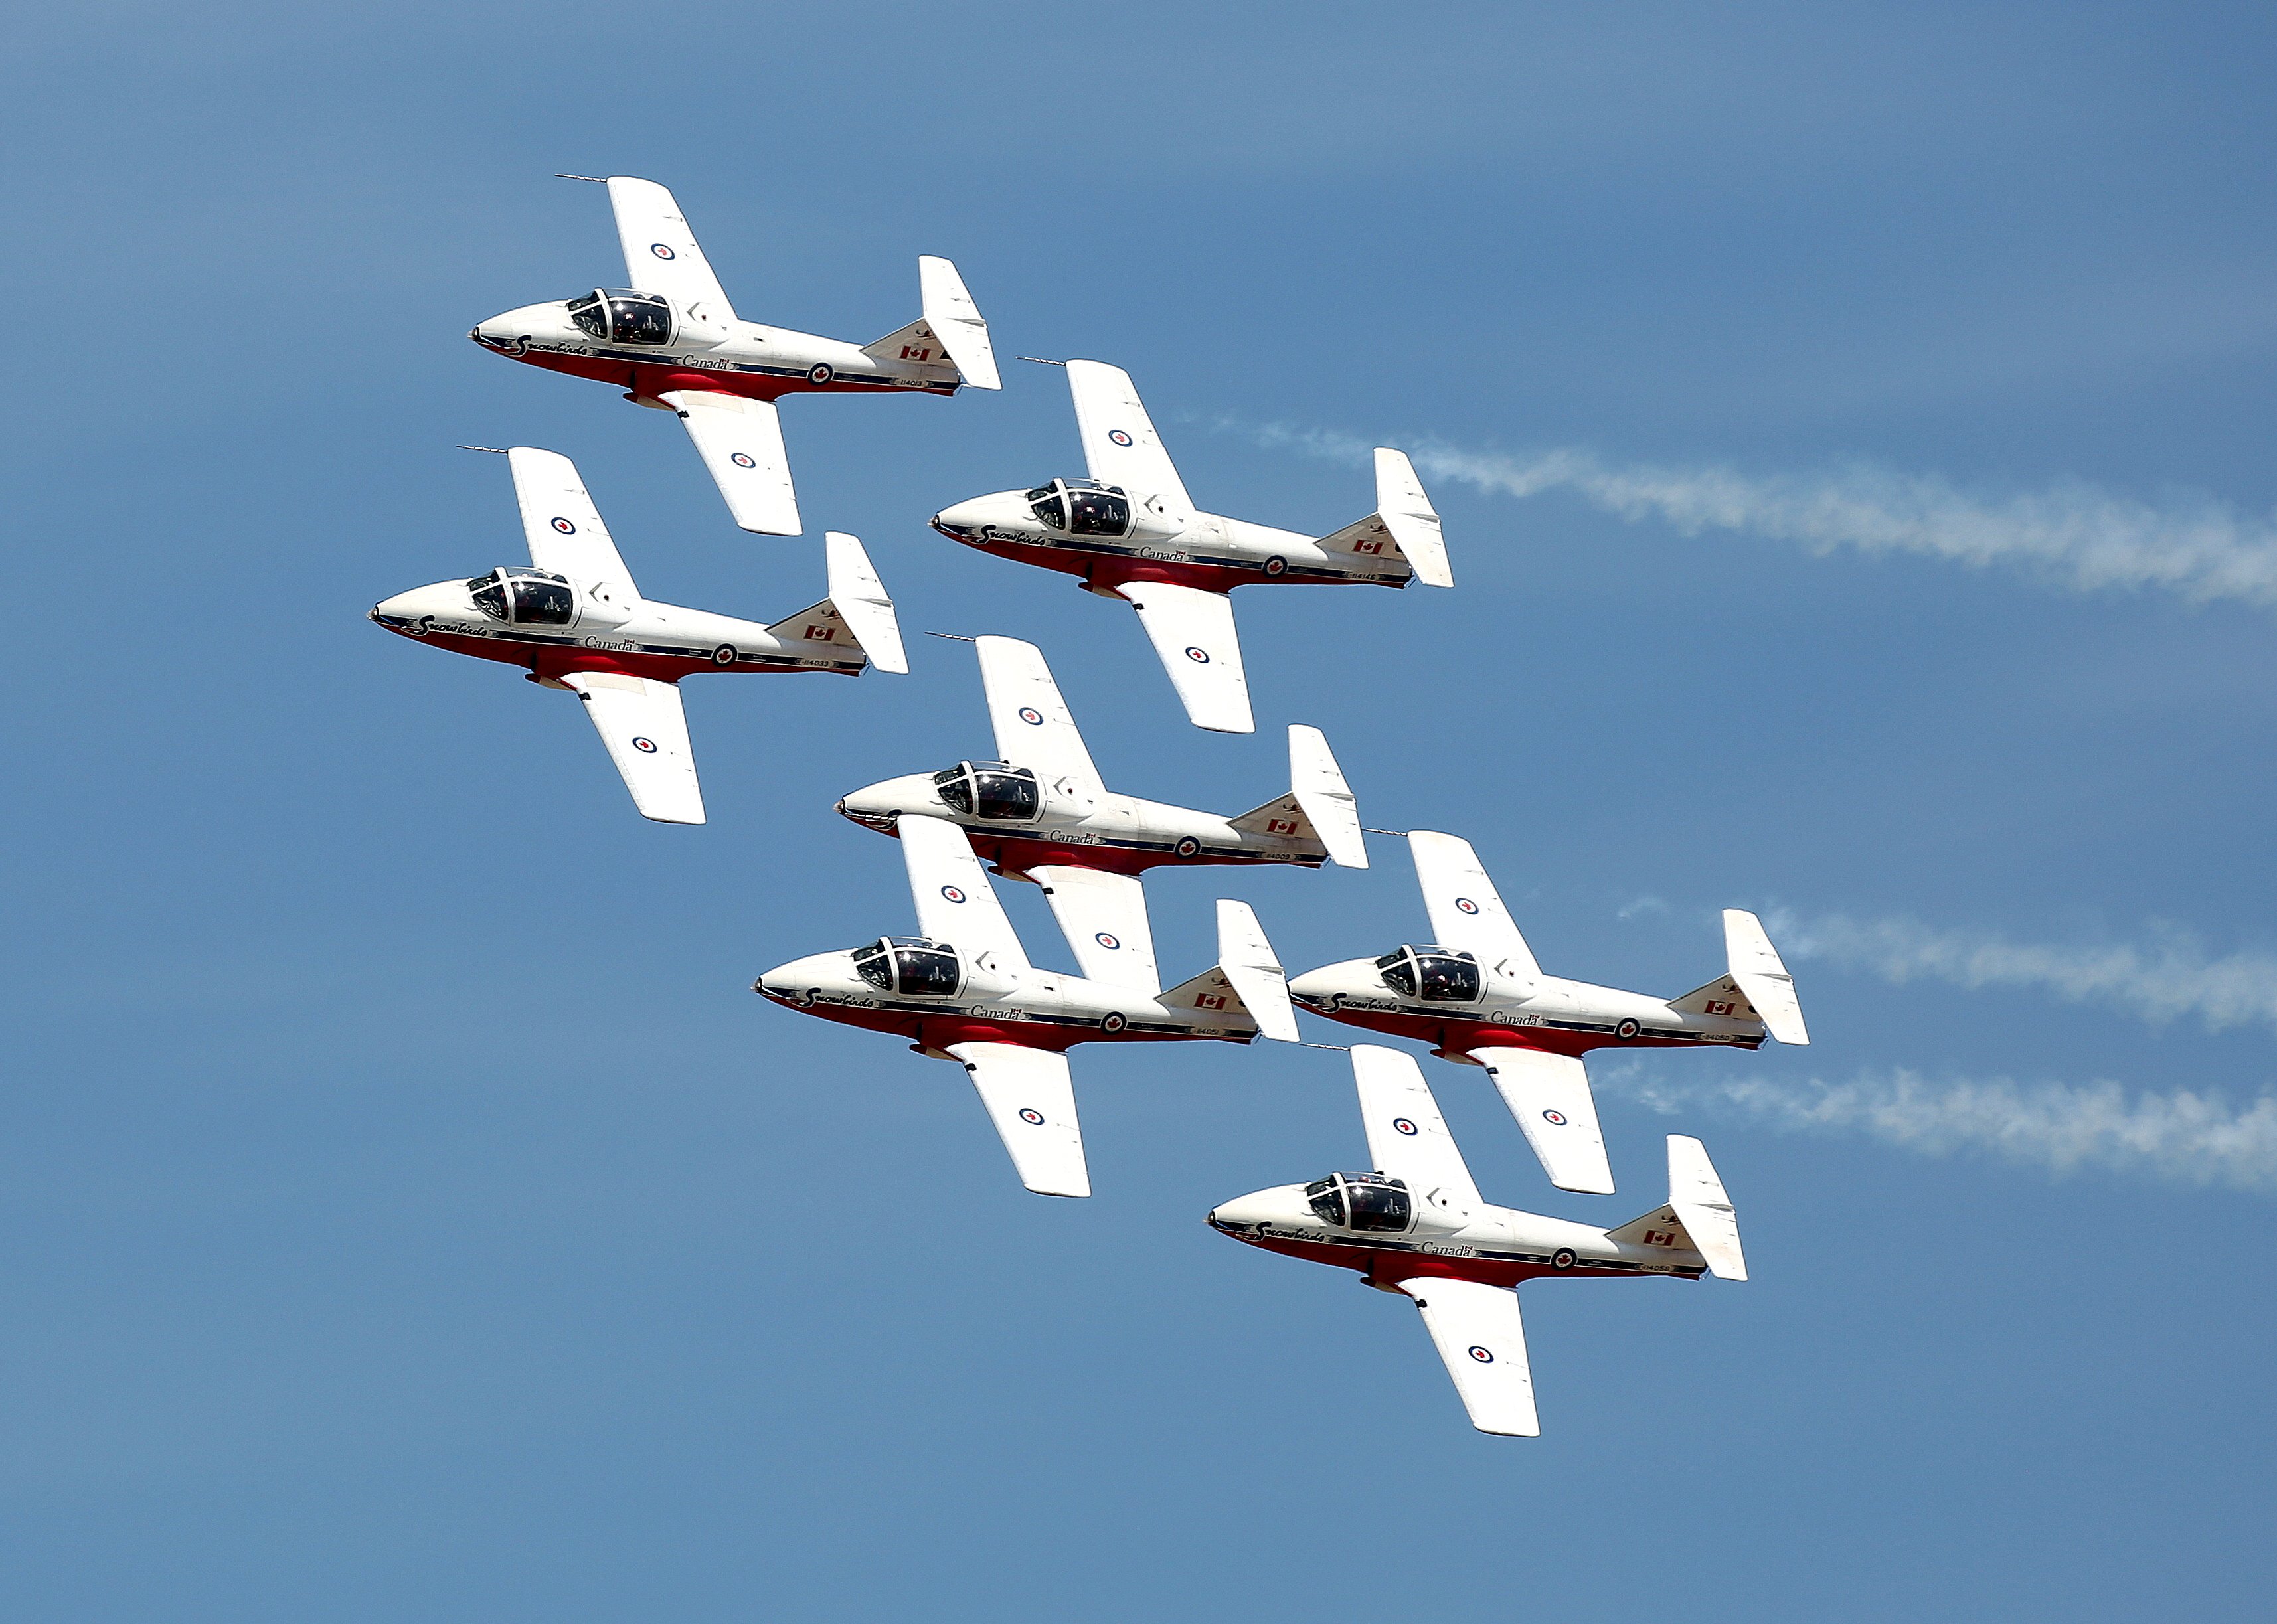 The seven-ship Double Diamond is a signature formation of the Snowbirds.